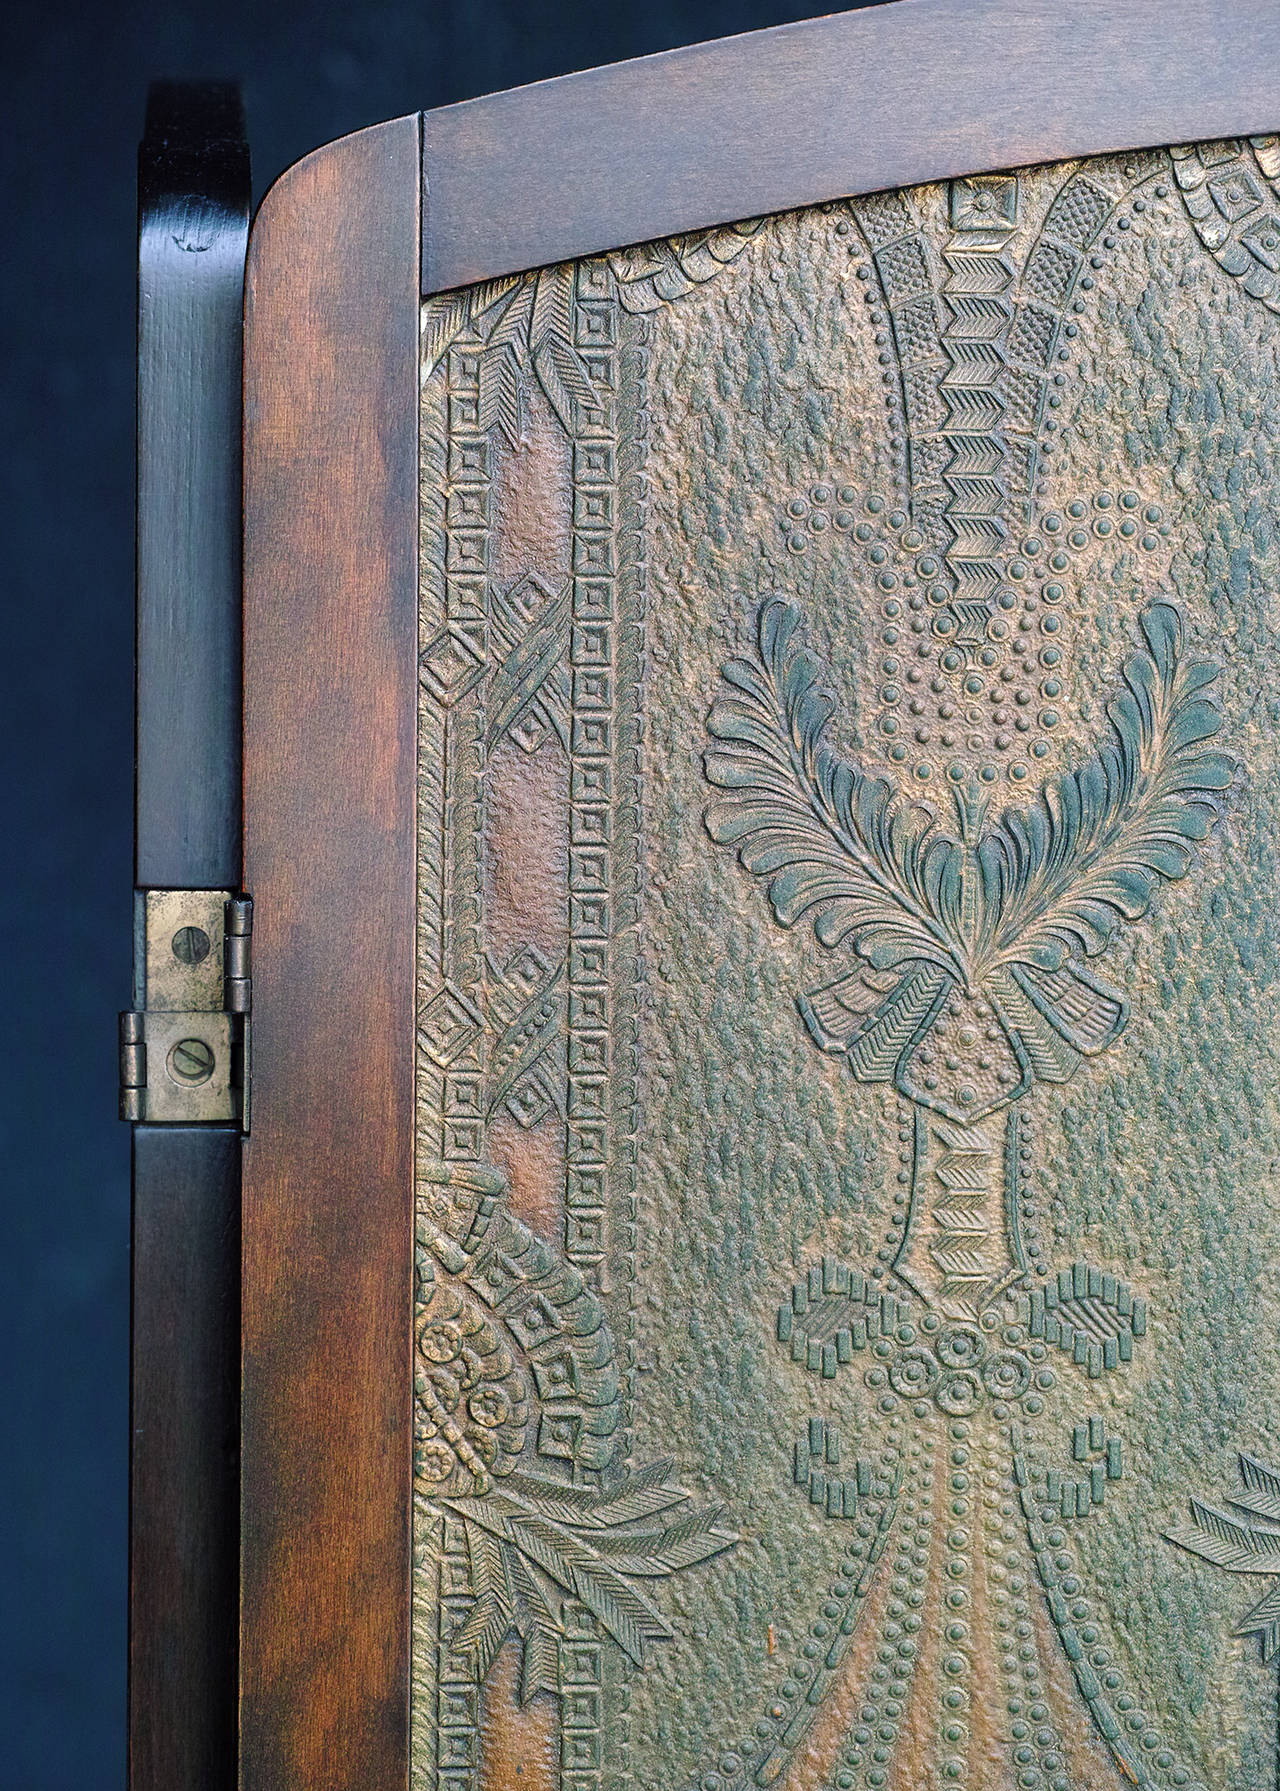 Embossed fiber board panels with hand tinted surface in predominately bronze and muted green tones. Arched wood frames. Hinges allow panels to be folded in either direction. Each panel is 22.25